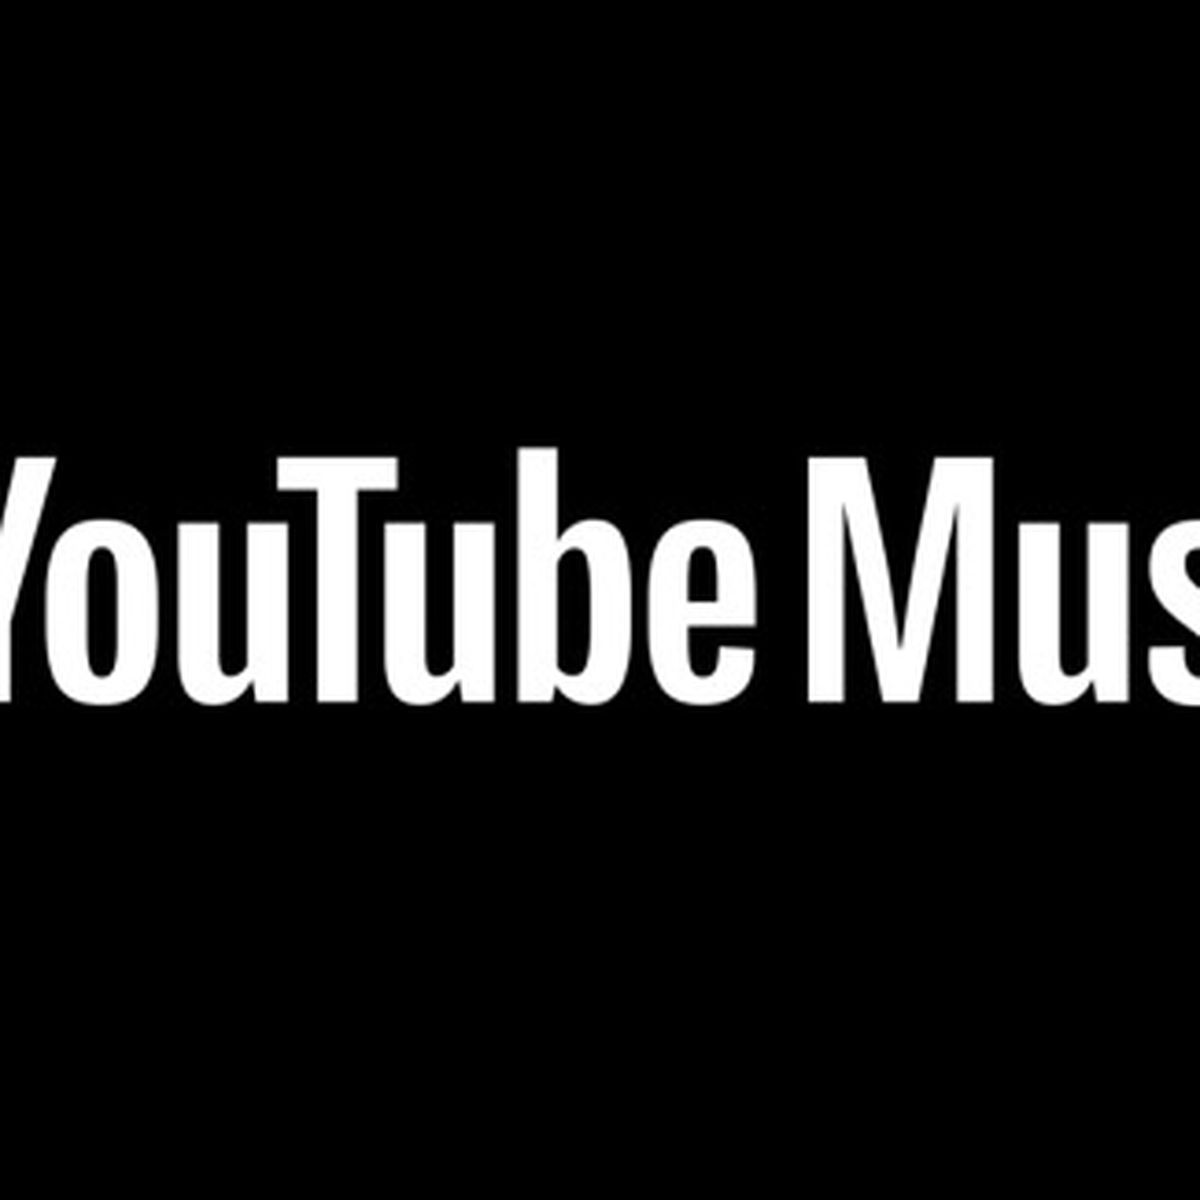 Youtube Music Readies Free Upload Feature Google Play Music Migration Service Coming Macrumors